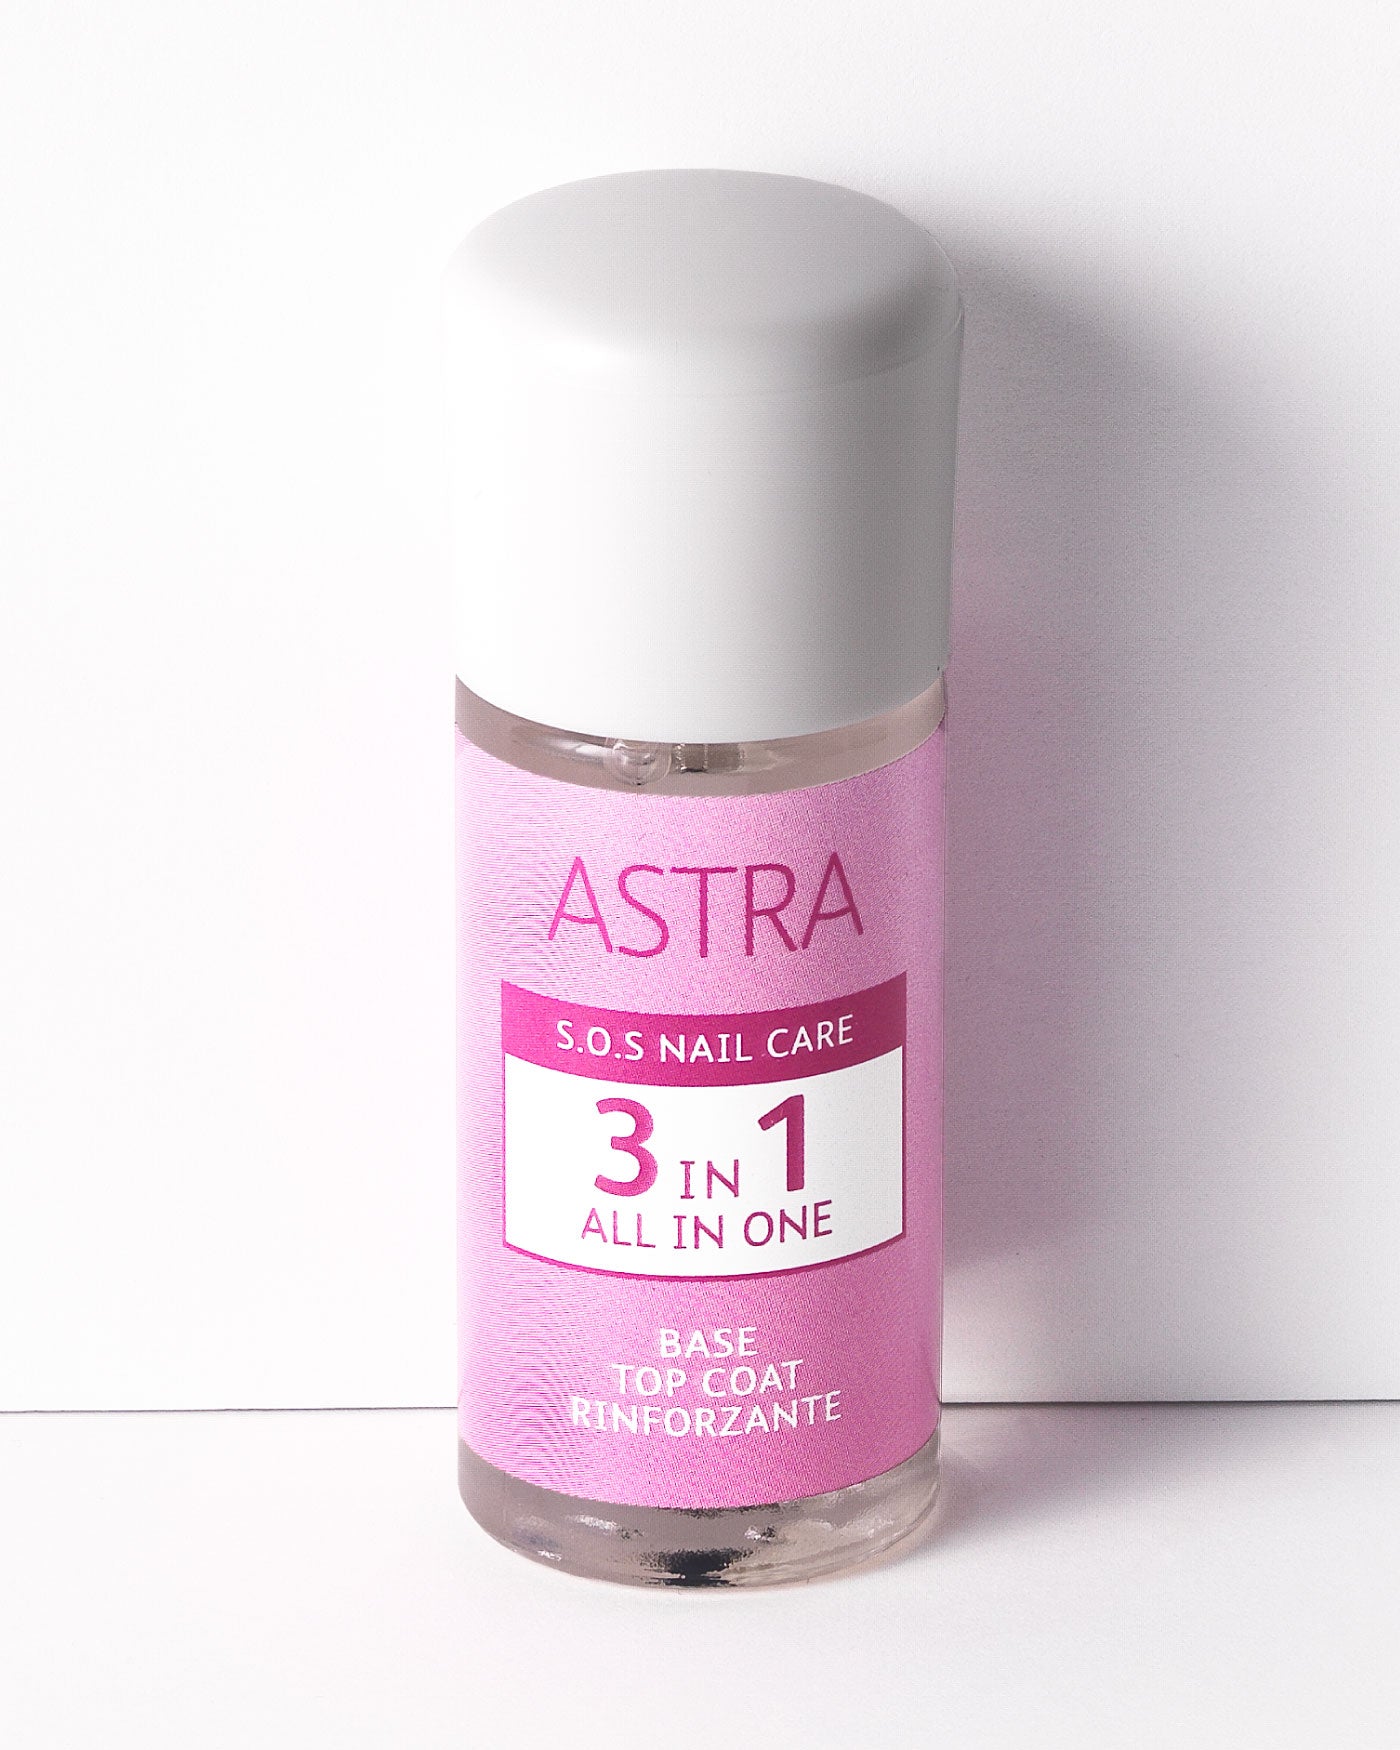 3 IN 1 ALL IN ONE - Base Top Coat Rinforzante - Mani - Astra Make-Up